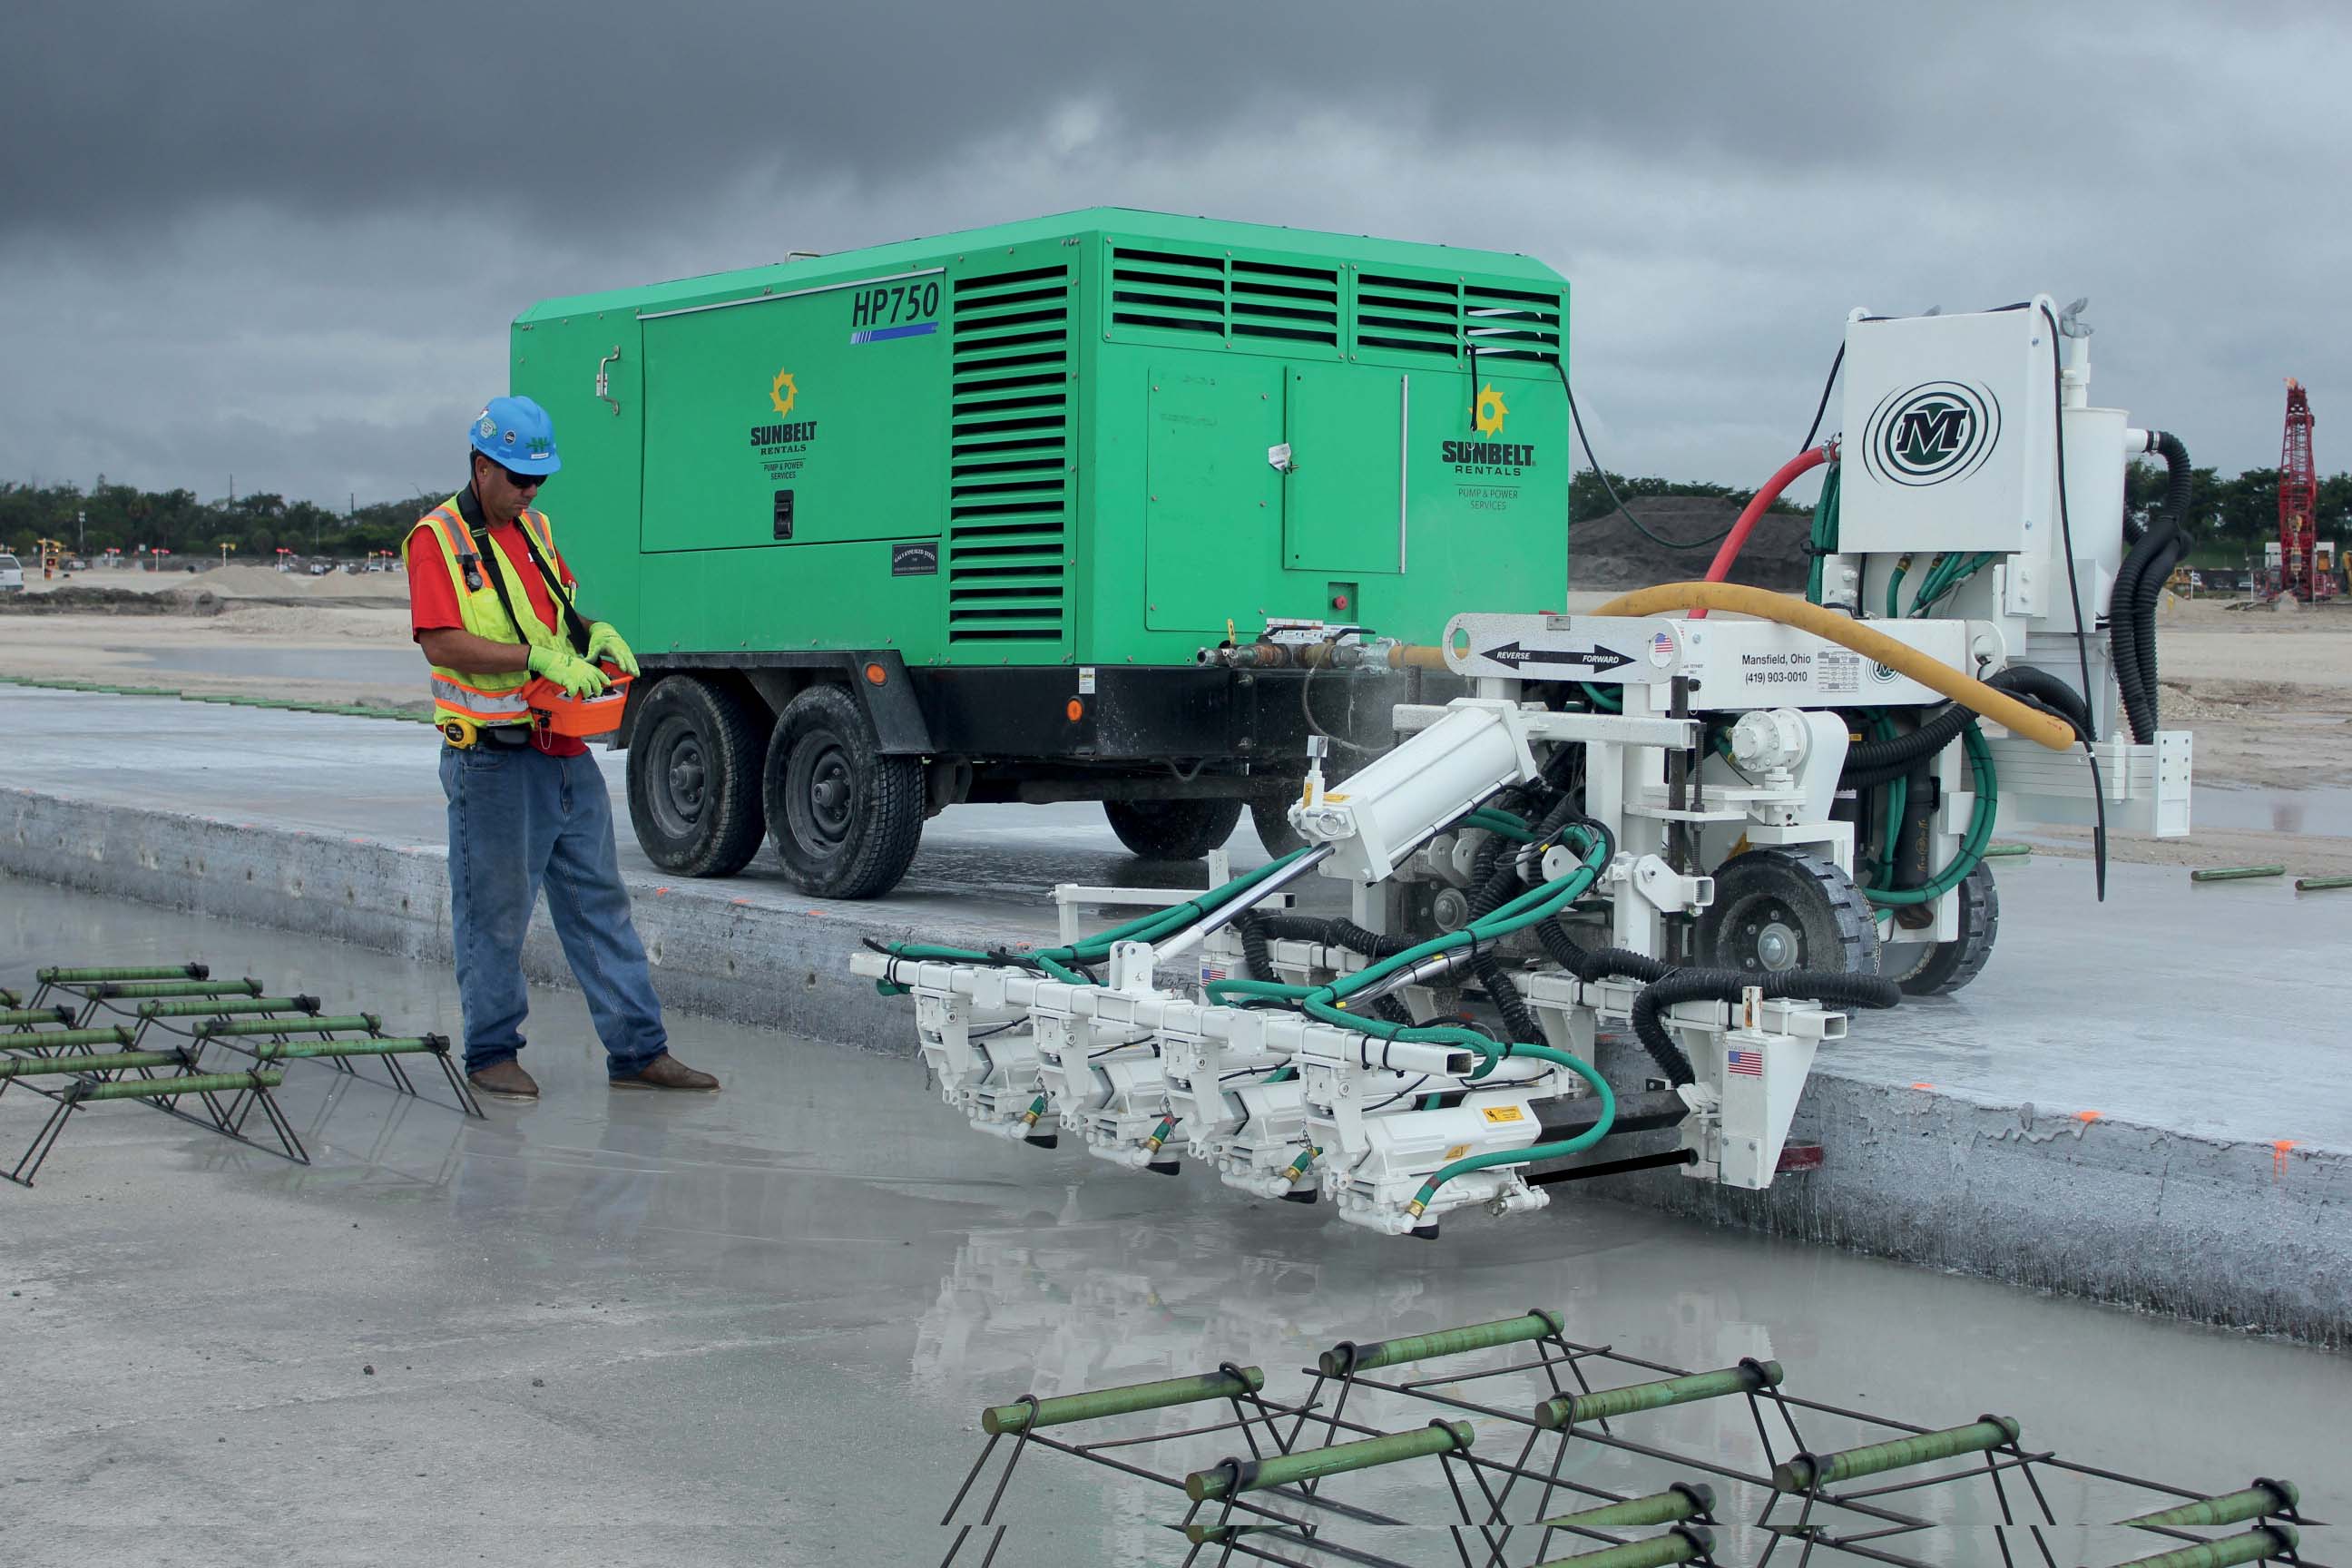 Minnich machine can be controlled remotely